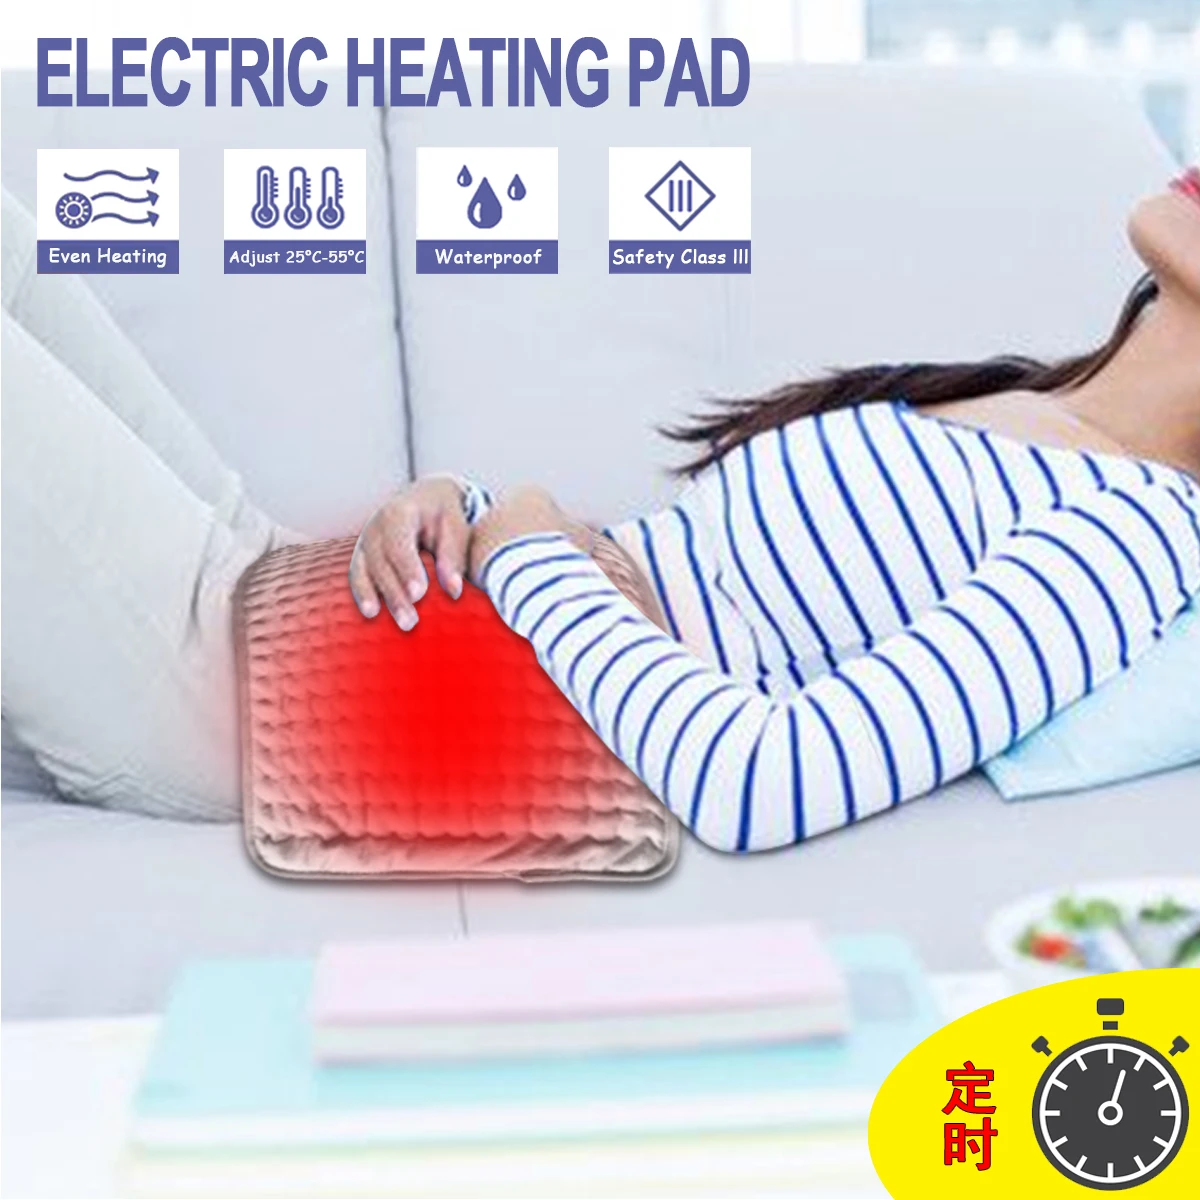 XL King Size electric Back Shoulder Heating therapy Pad (Charcoal Gray) - Fast-Heating Machine-Washable Pad